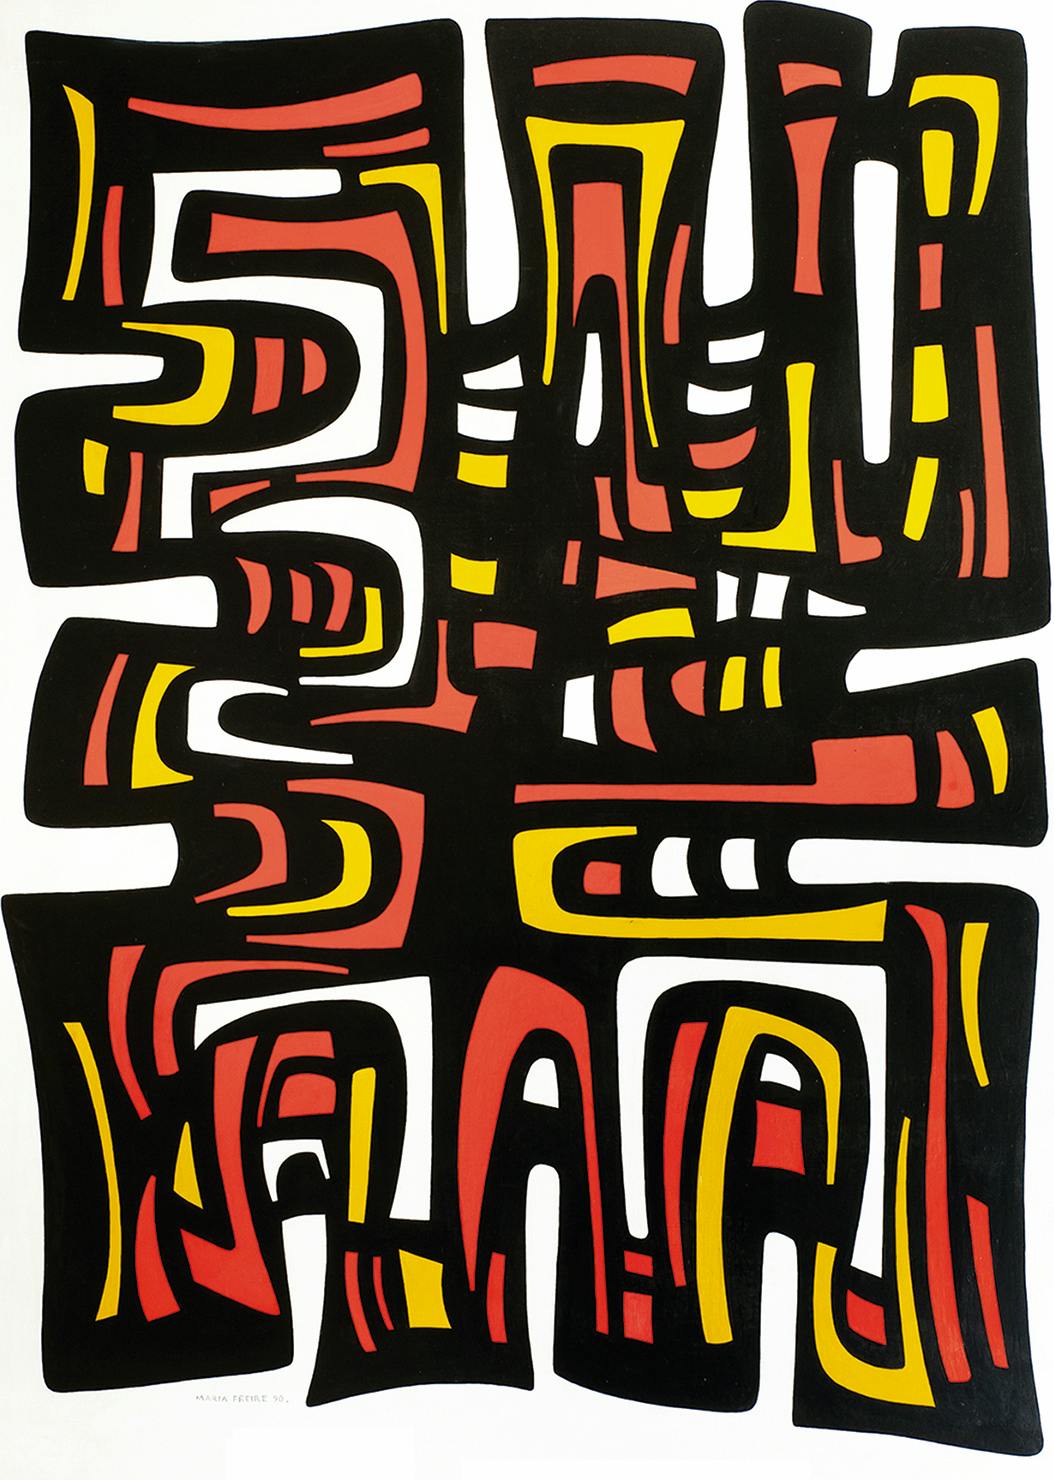 An undulating abstract shape of red, orange, yellow, and black.